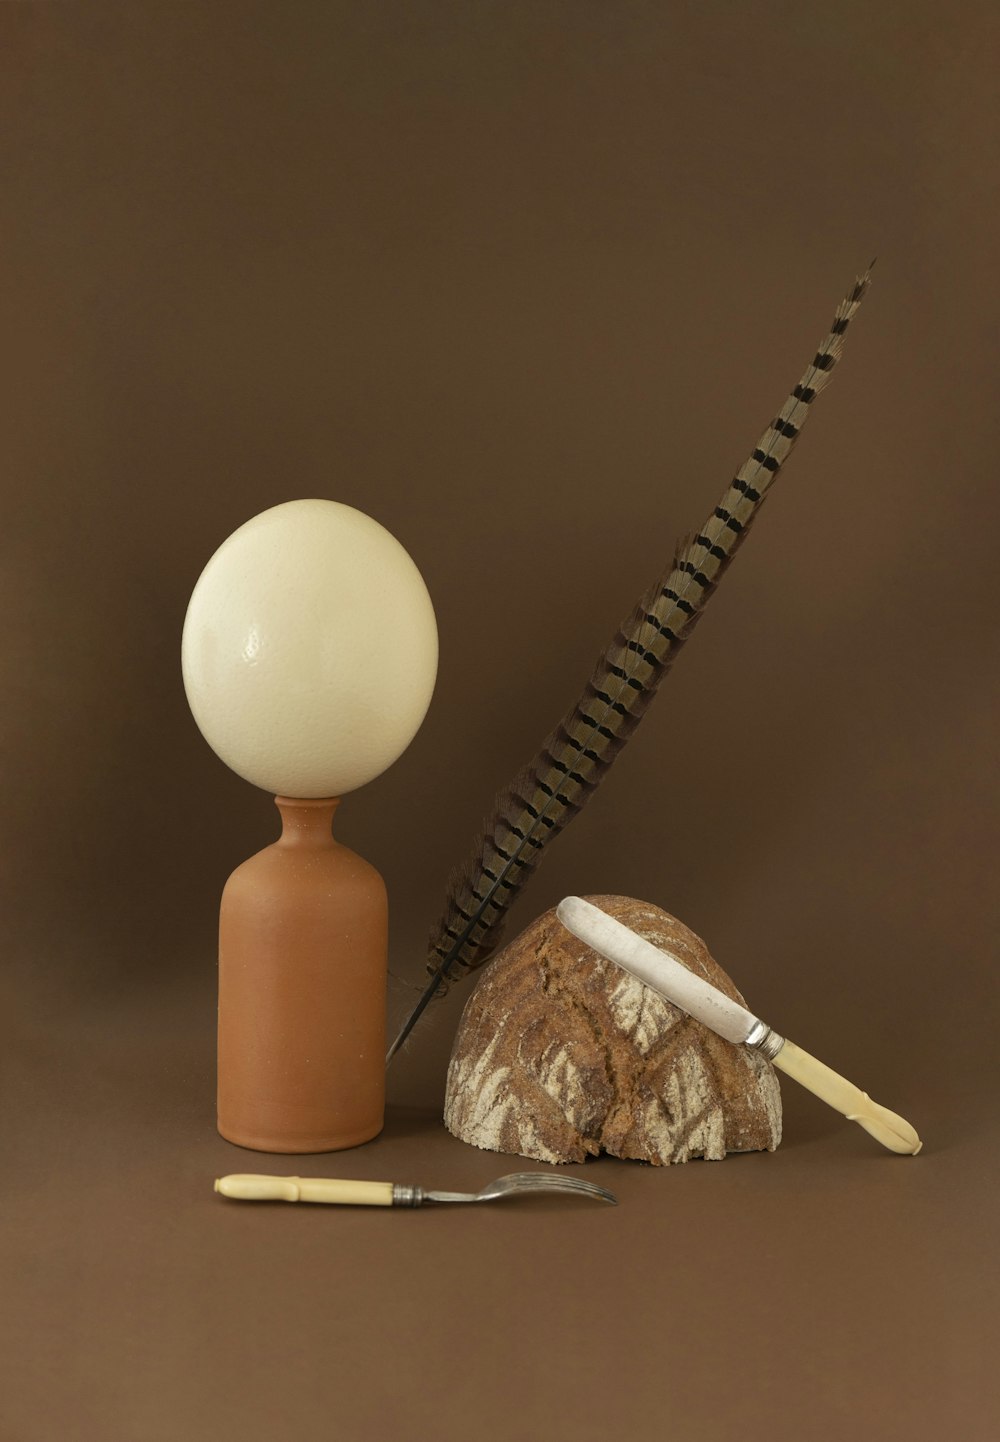 a pair of scissors and a feather on a brown background